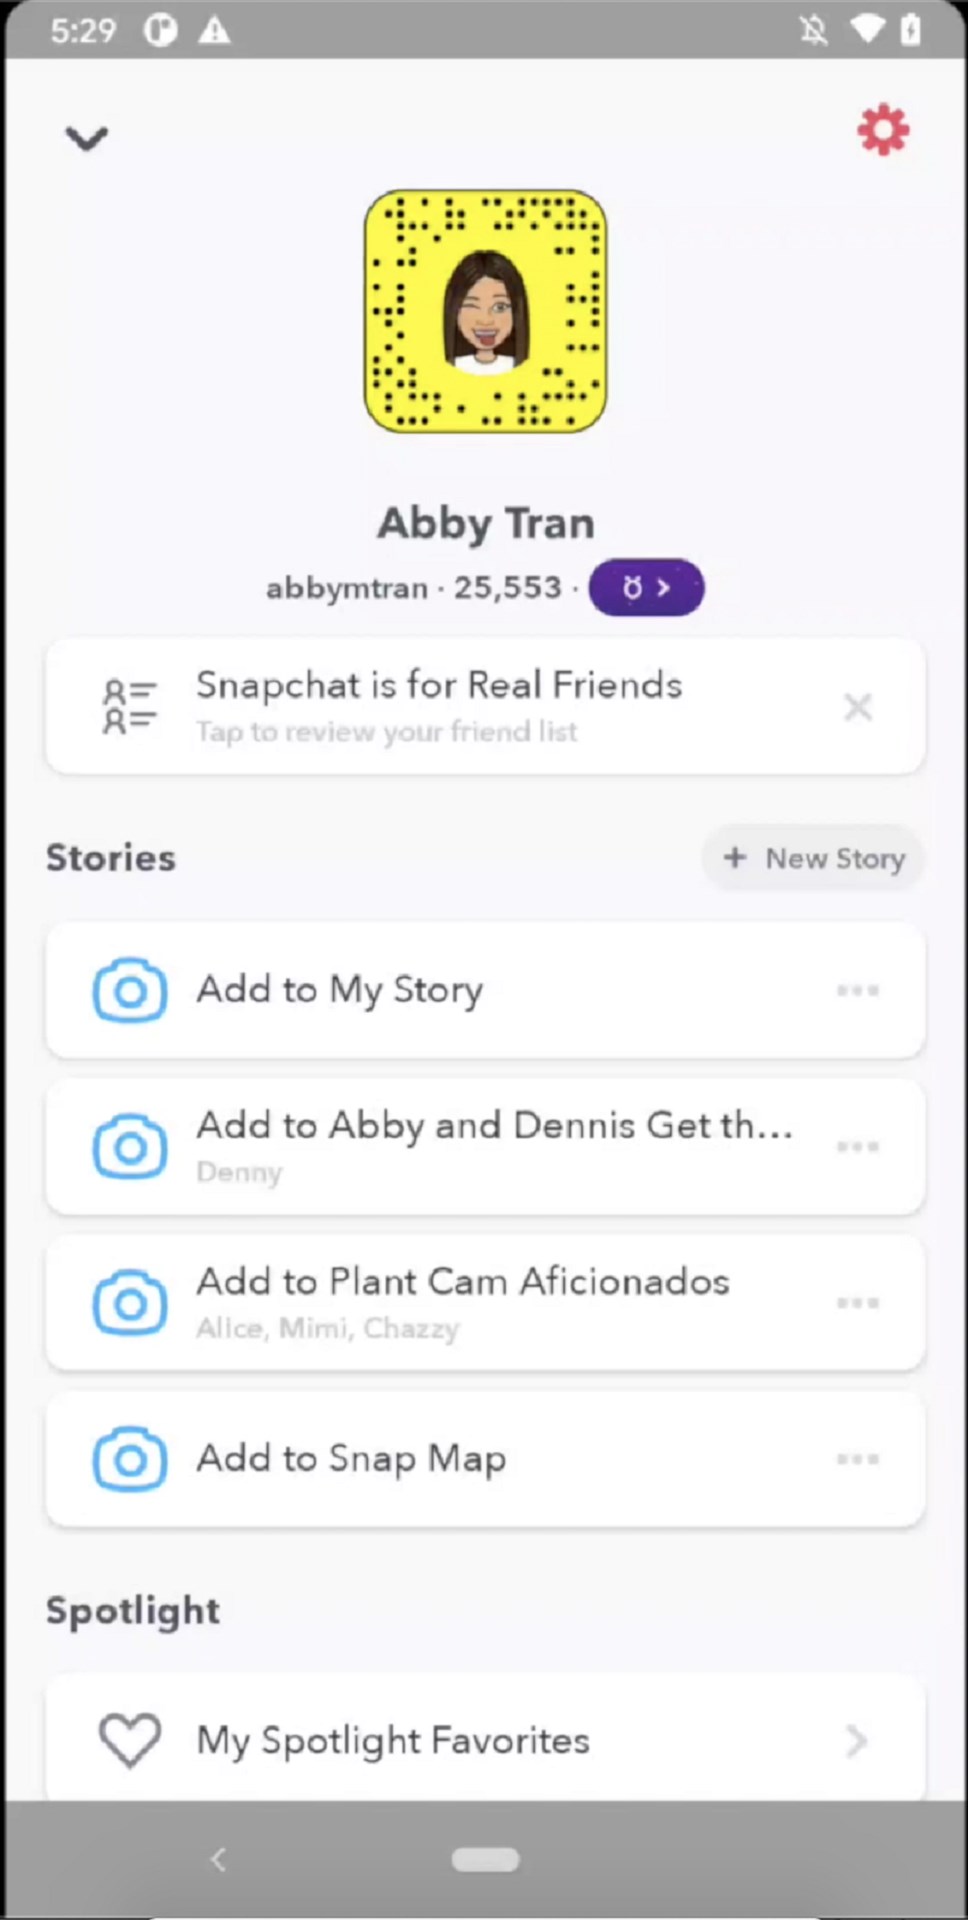 The Friend Check Up tool will encourage users to review their friend list and those on it (Snapchat)